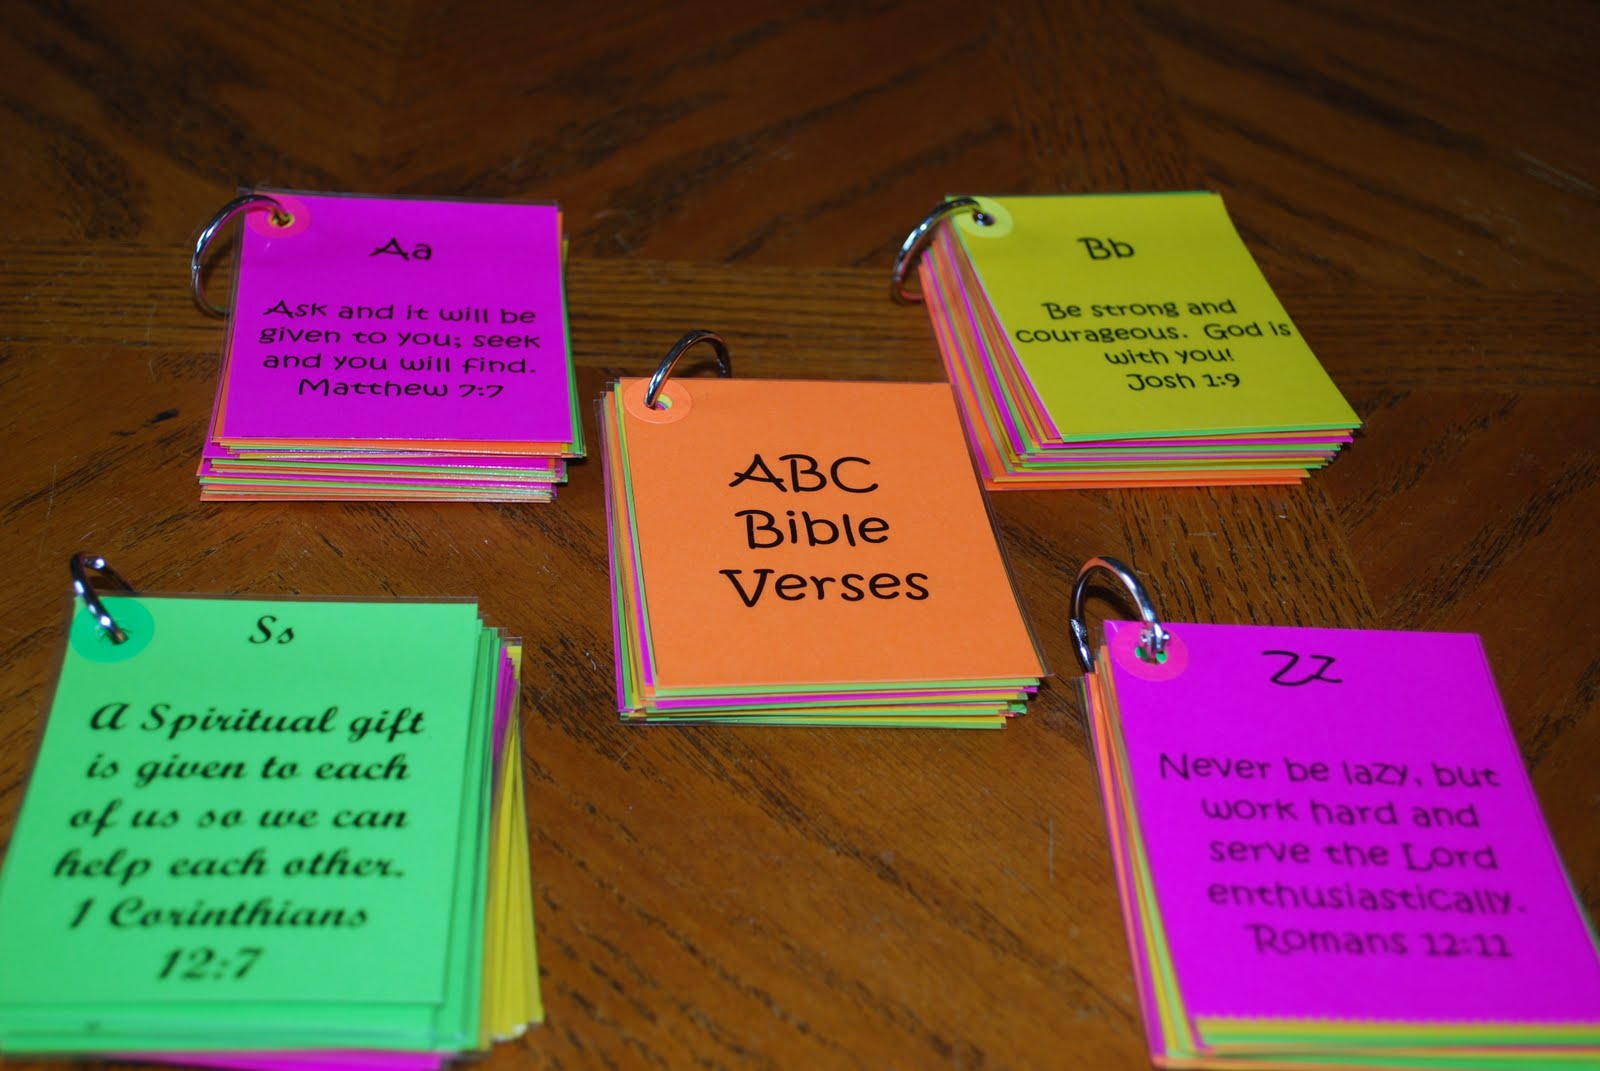 7-best-images-of-printable-books-of-bible-flash-cards-bible-printables-bible-books-flash